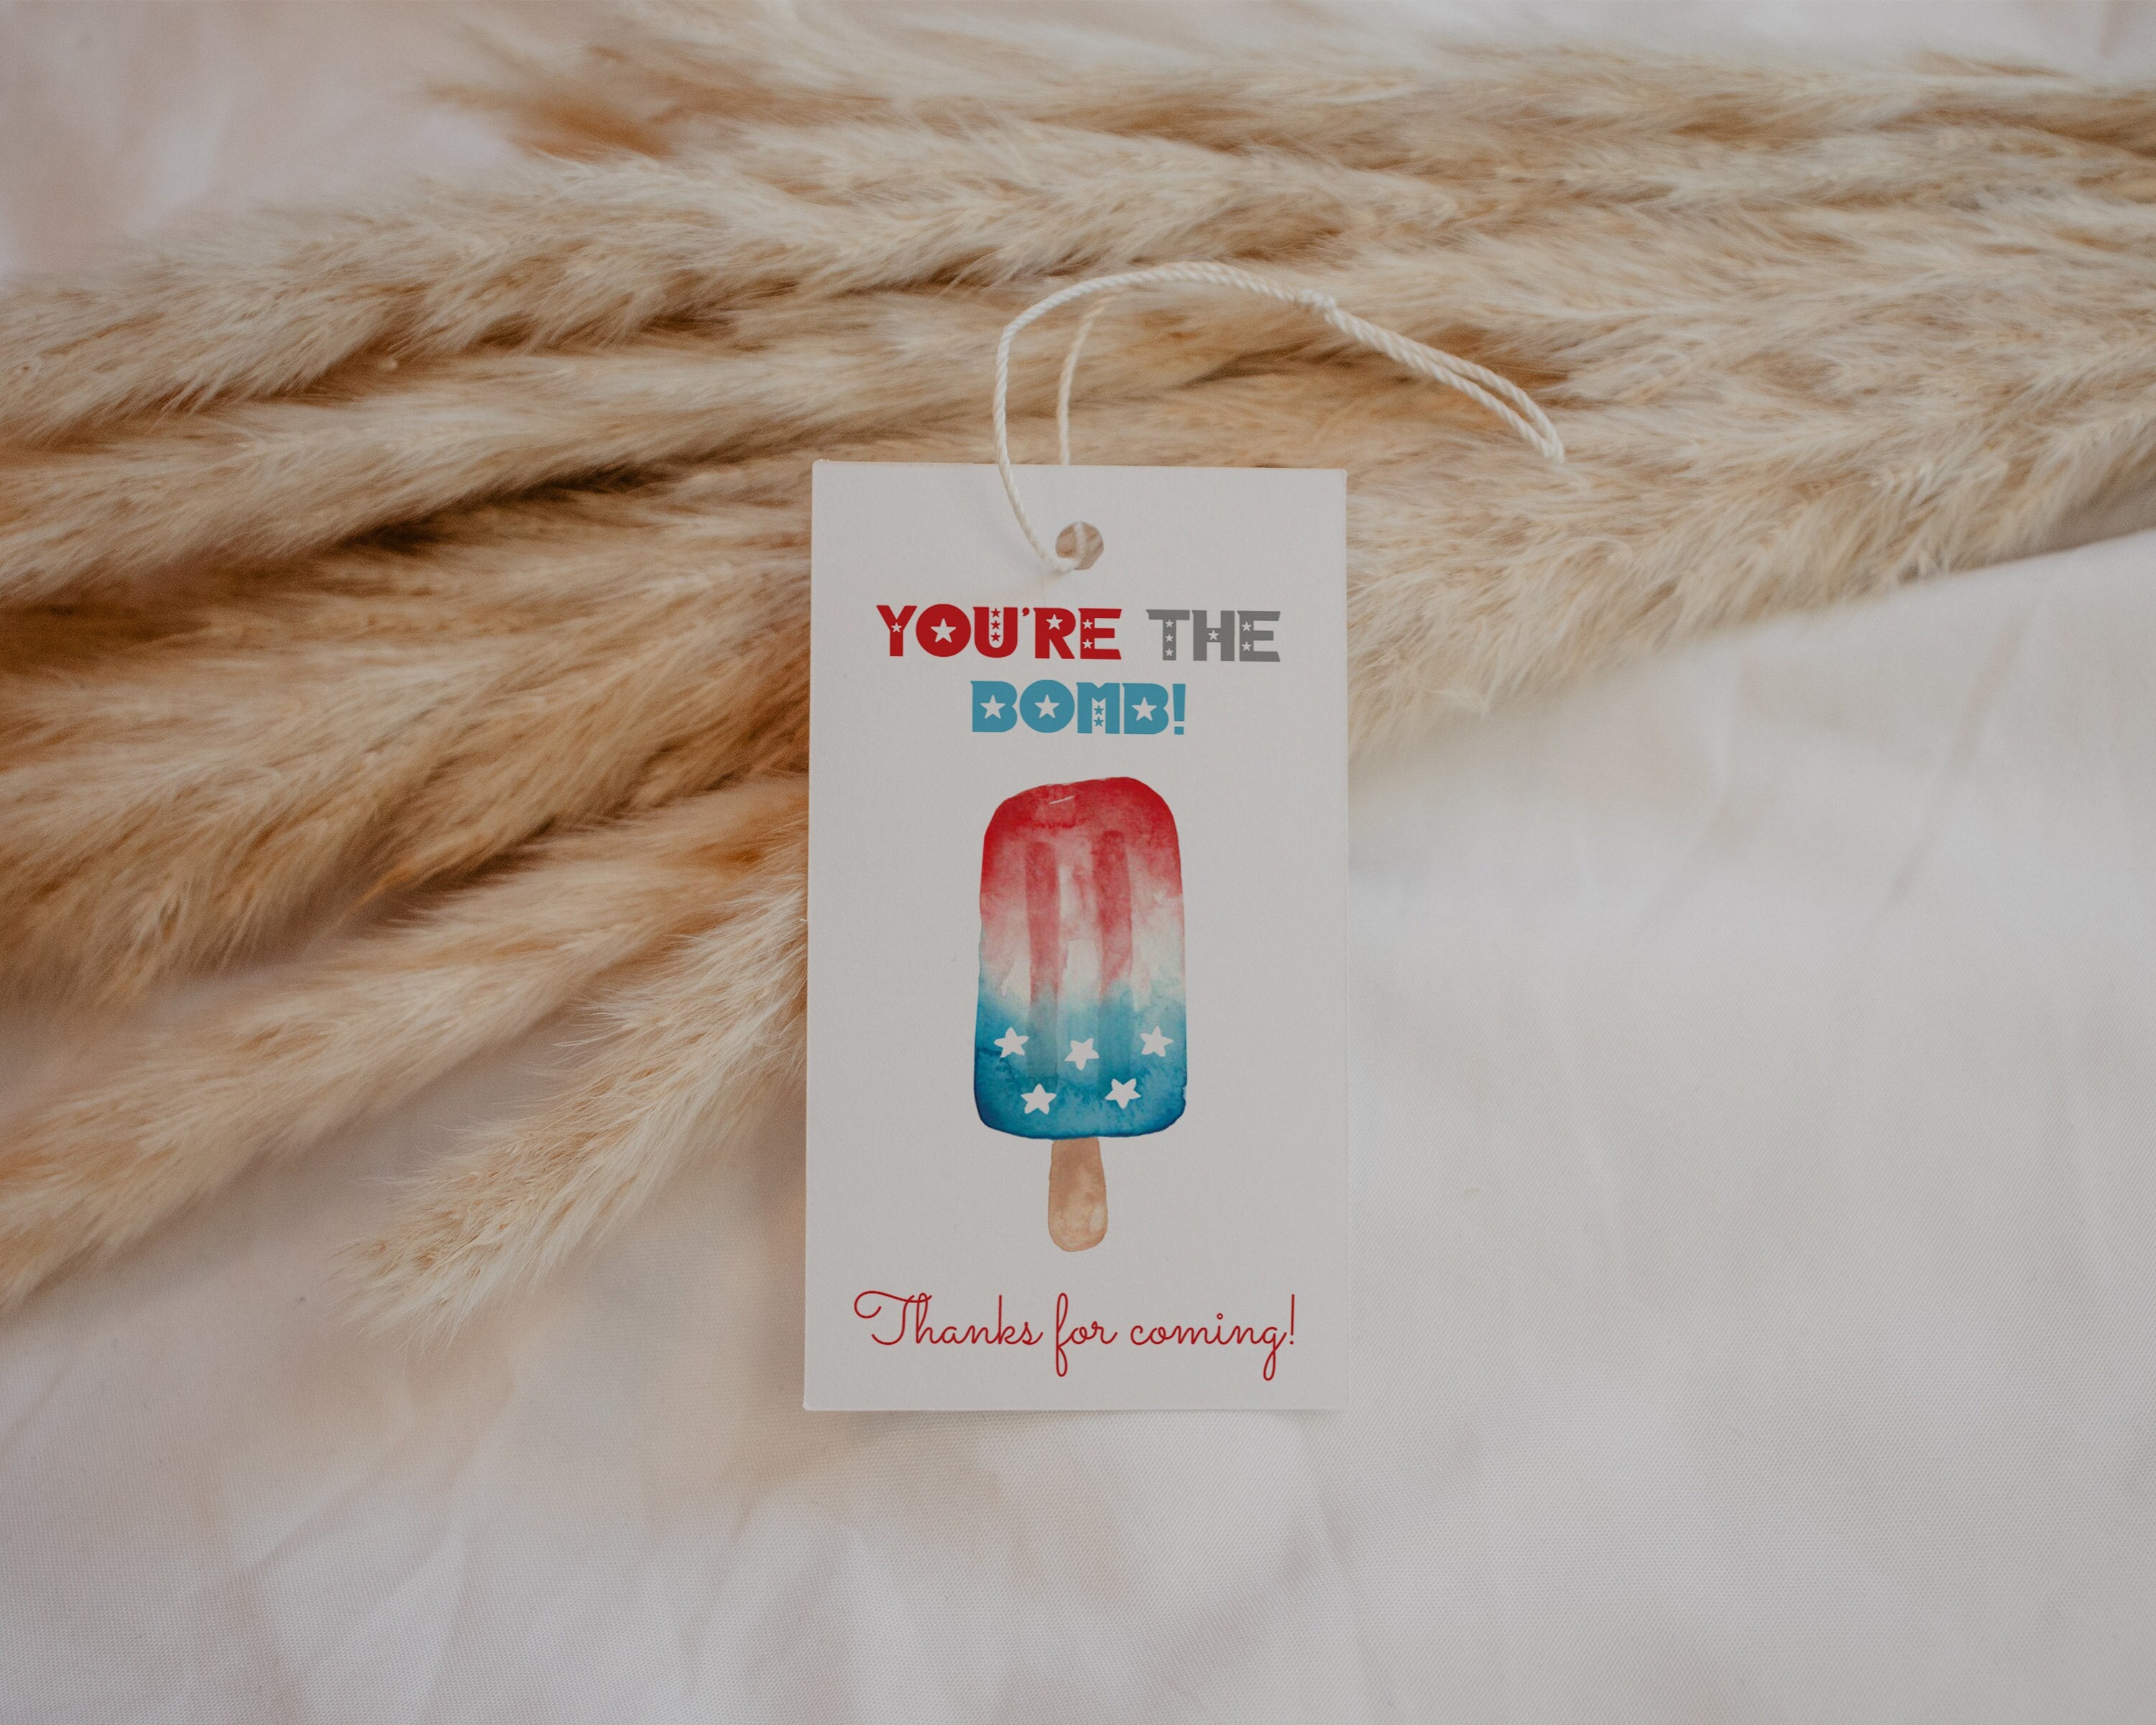 Ice Pop Popsicle Red White Blue Leash or Key Holder, 1 - QFC